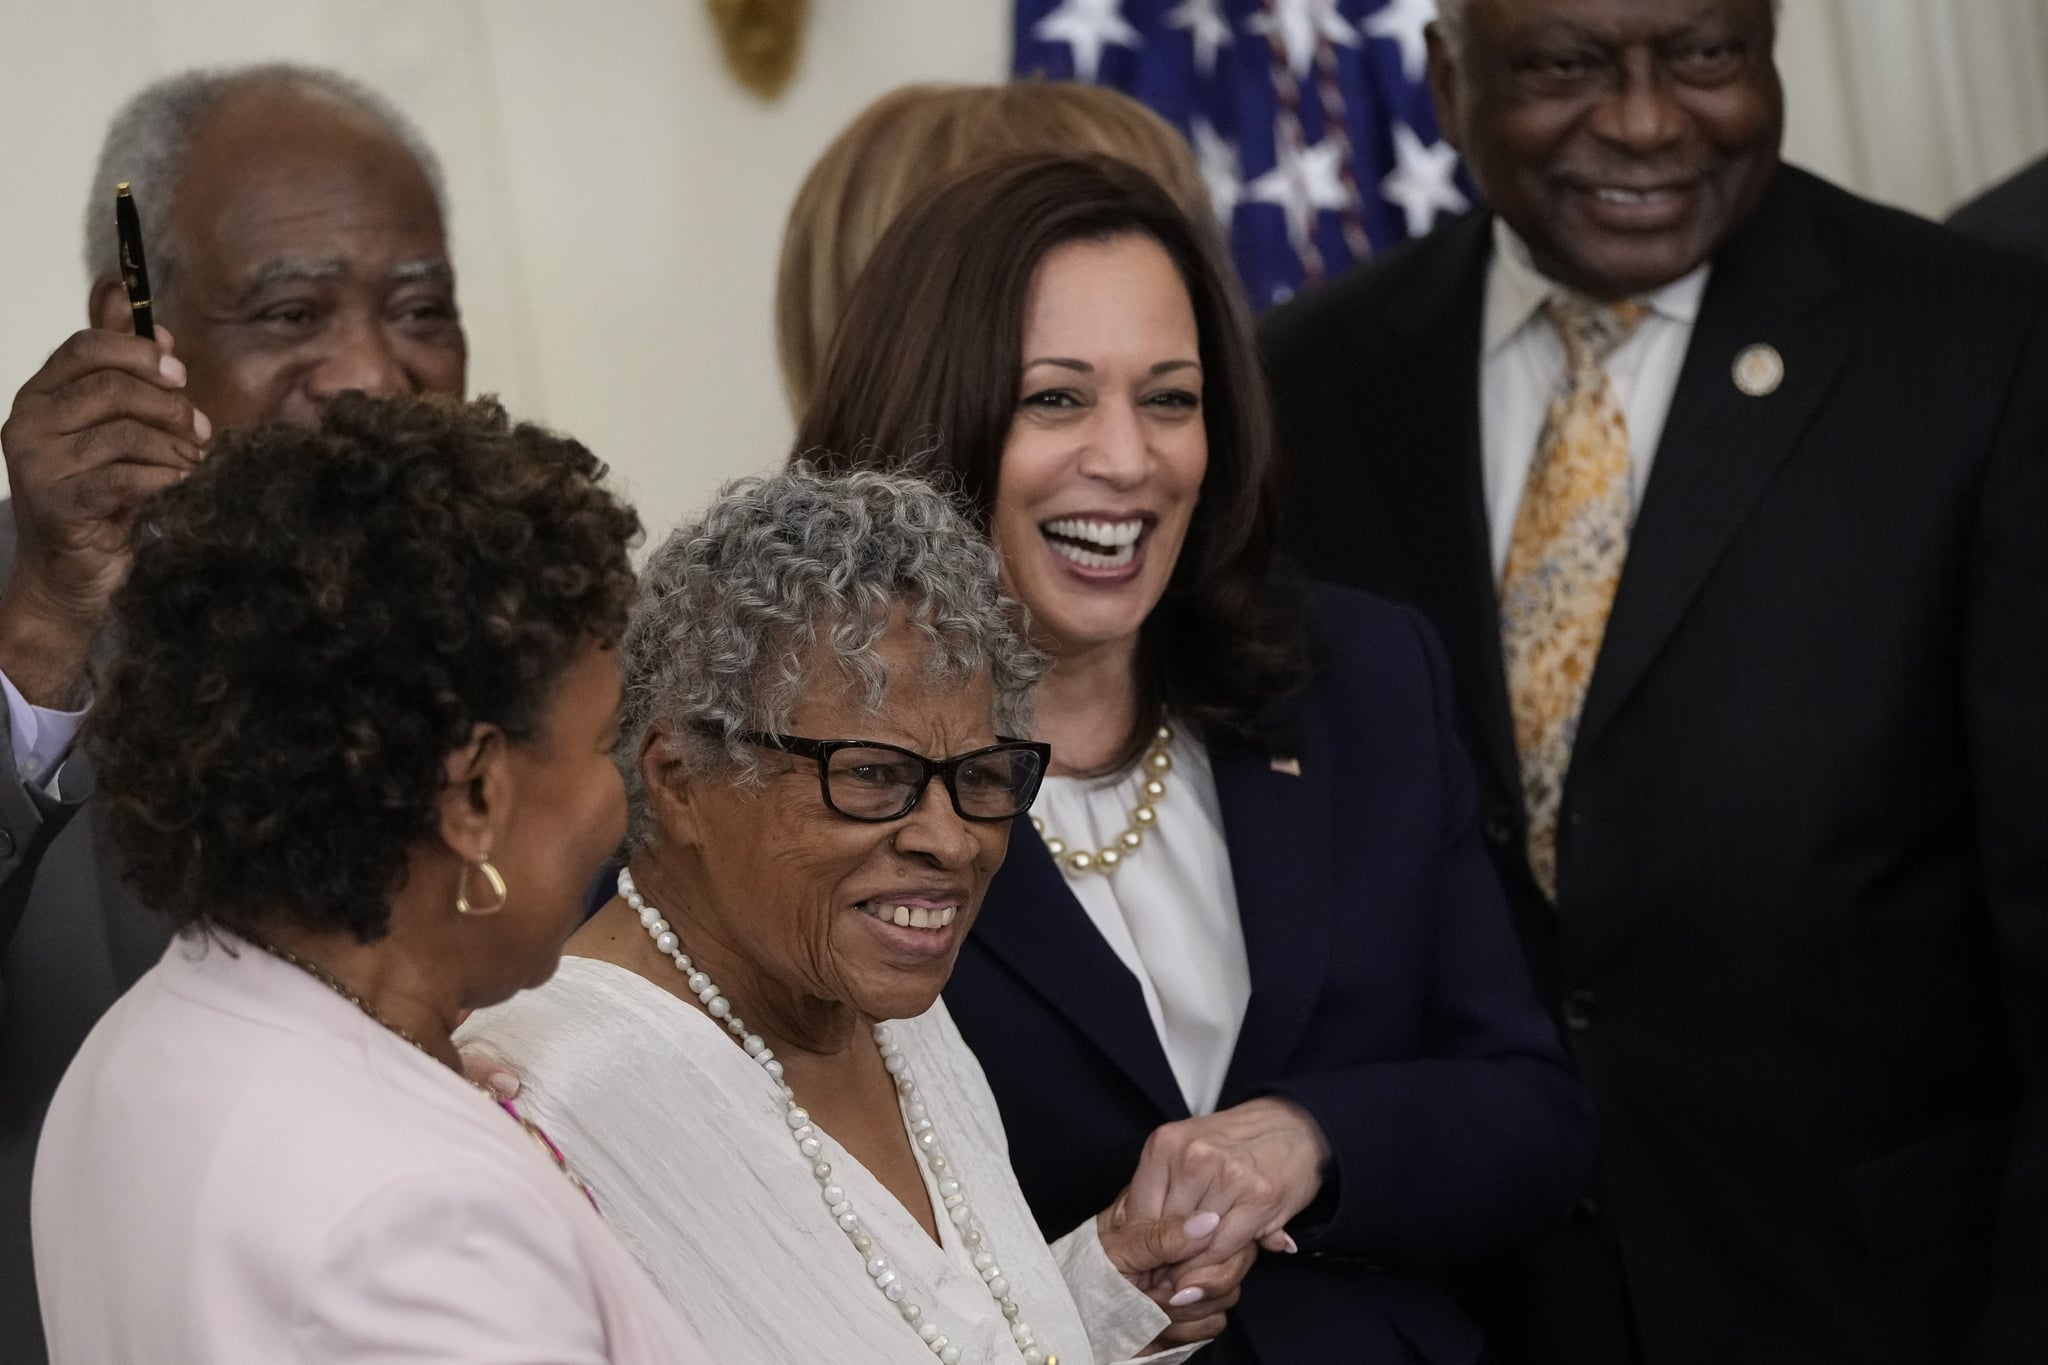 WASHINGTON, DC - JUNE 17: (L-R) 94-year-old activist and retired educator Opal Lee, known as the Grandmother of Juneteenth, holds hands with Vice President Kamala Harris as U.S. President Joe Biden signs the Juneteenth National Independence Day Act into law in the East Room of the White House on June 17, 2021 in Washington, DC. The Juneteenth holiday marks the end of slavery in the United States and the Juneteenth National Independence Day will become the 12th legal federal holiday — the first new one since Martin Luther King Jr. Day was signed into law in 1983. (Photo by Drew Angerer/Getty Images)